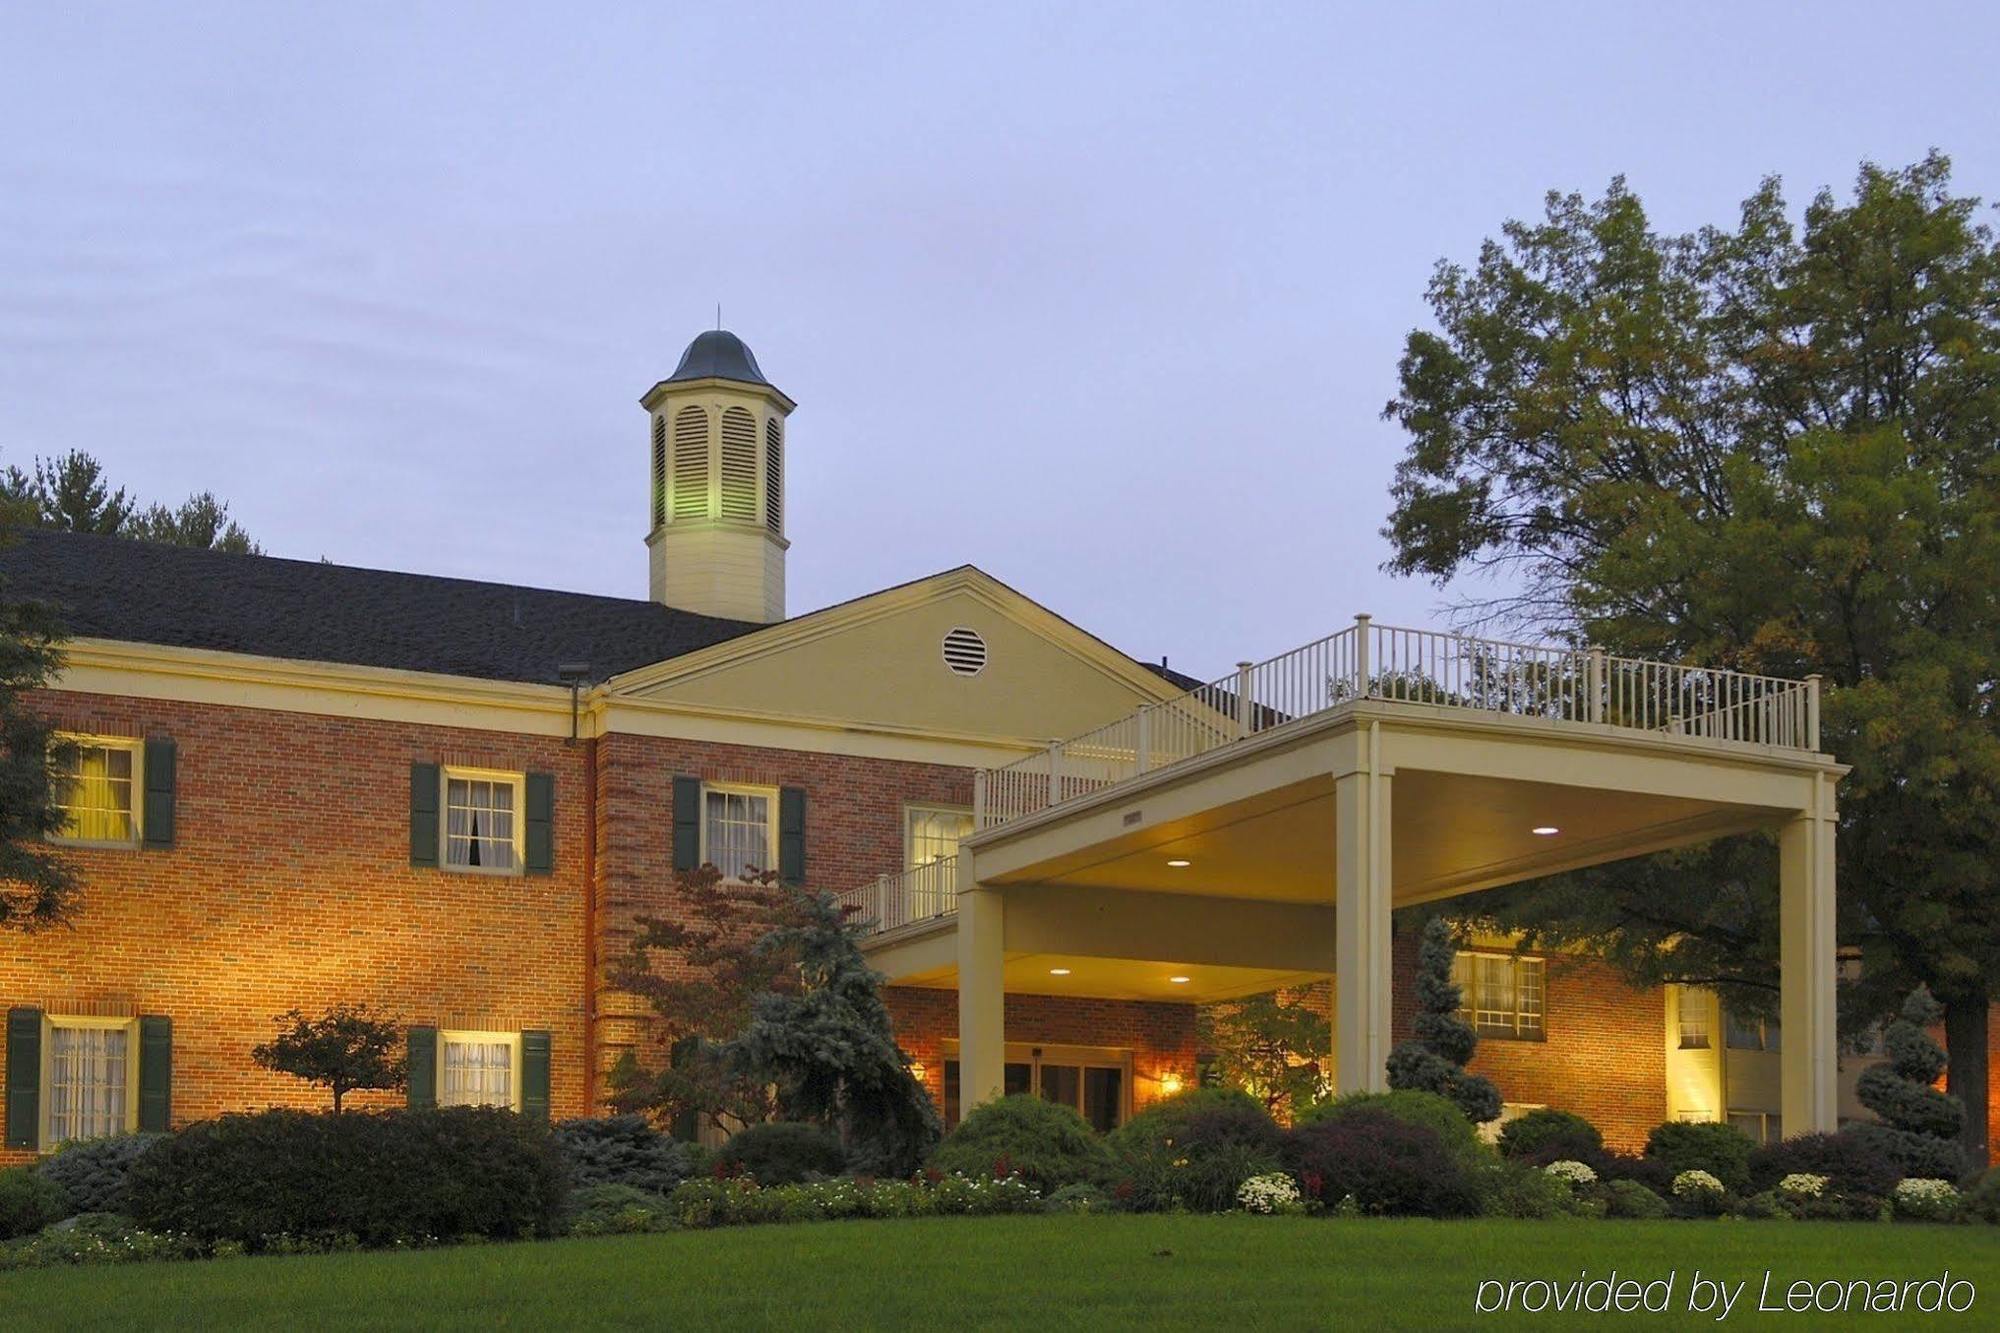 Ohio University Inn And Conference Center Athens Exterior photo